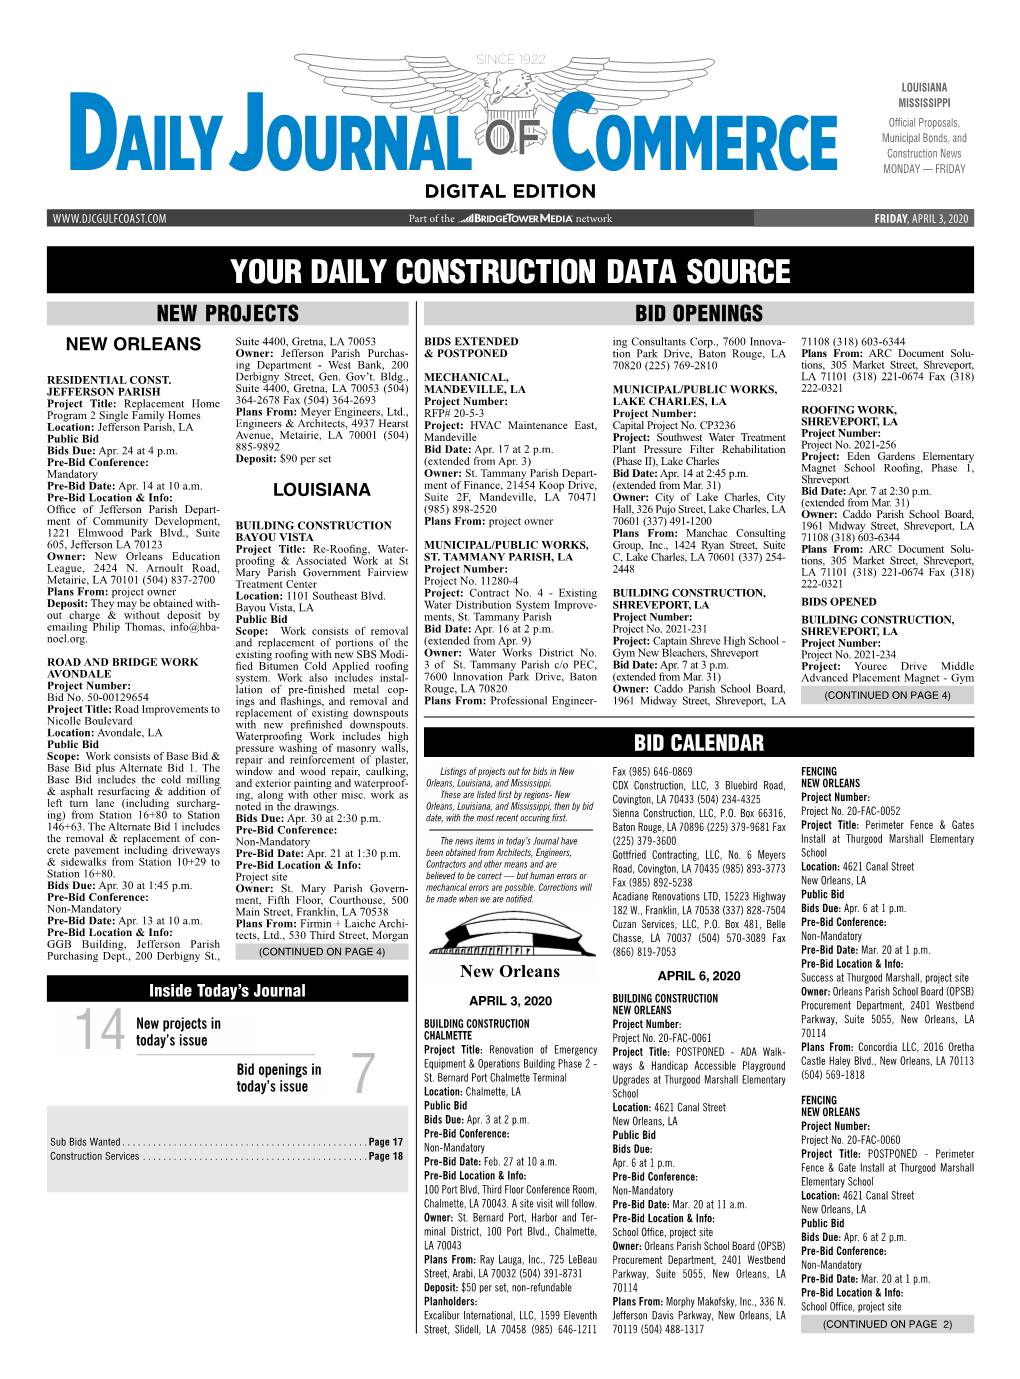 Your Daily Construction Data Source